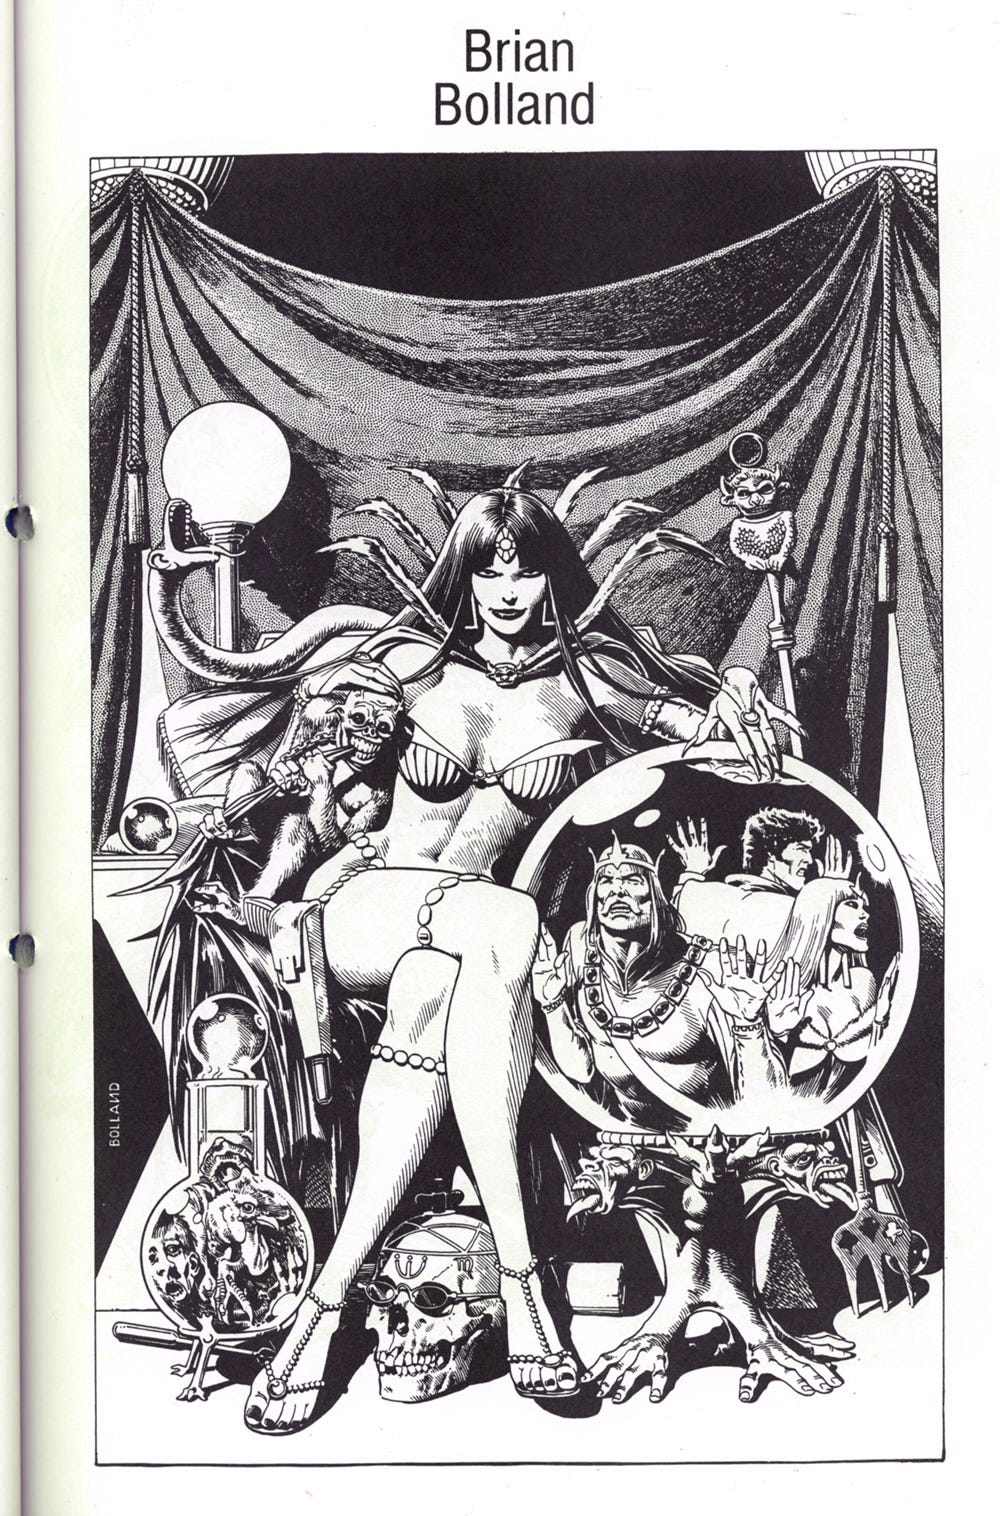 The Cuttings File #1. Brian Bolland - by Steve Cook